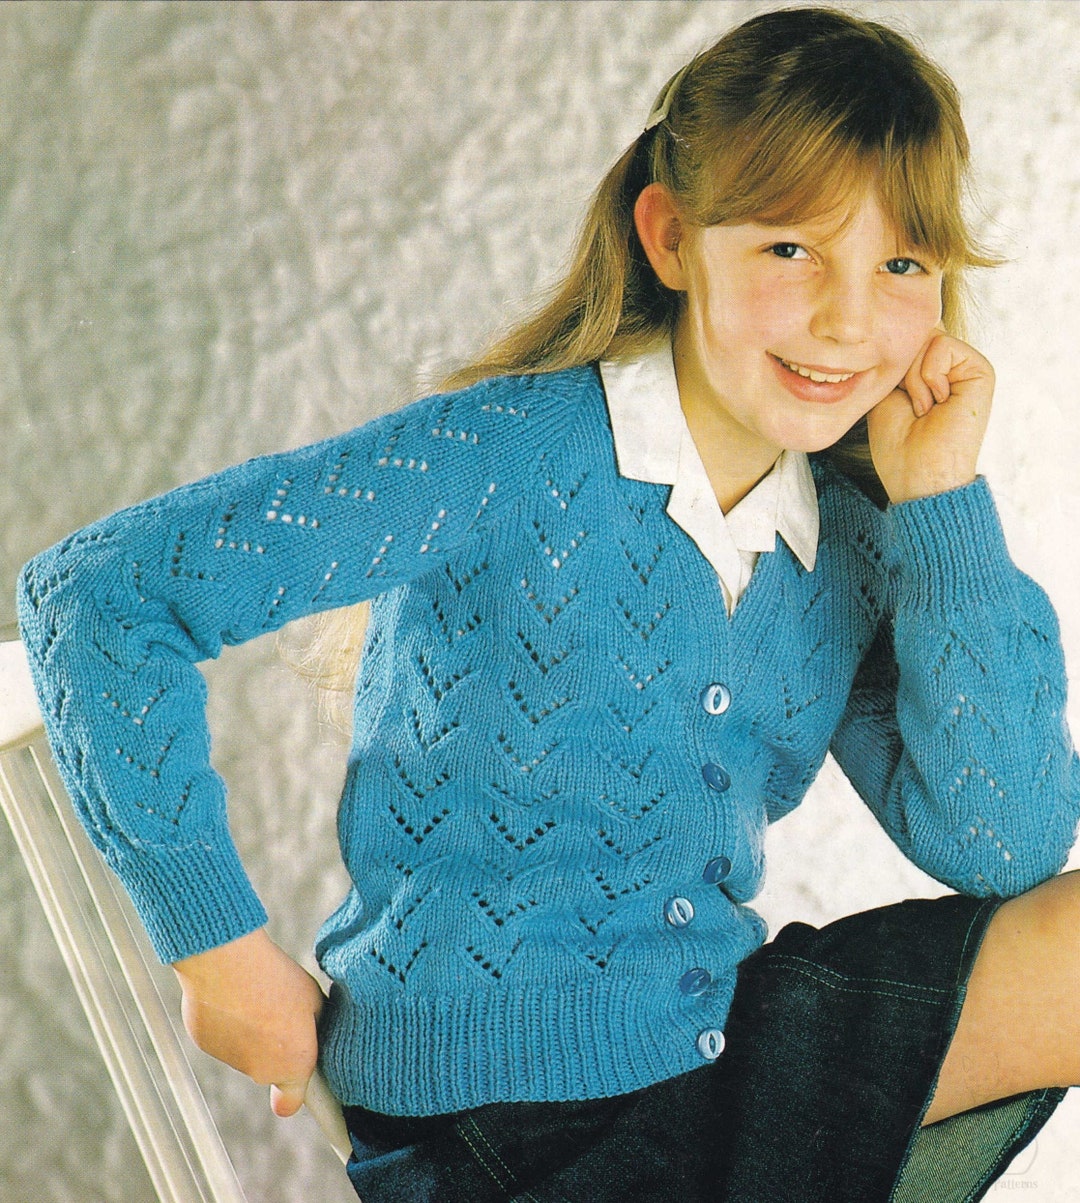 Toddlers and Girls Pretty Lace Pattern Cardigan Vintage - Etsy